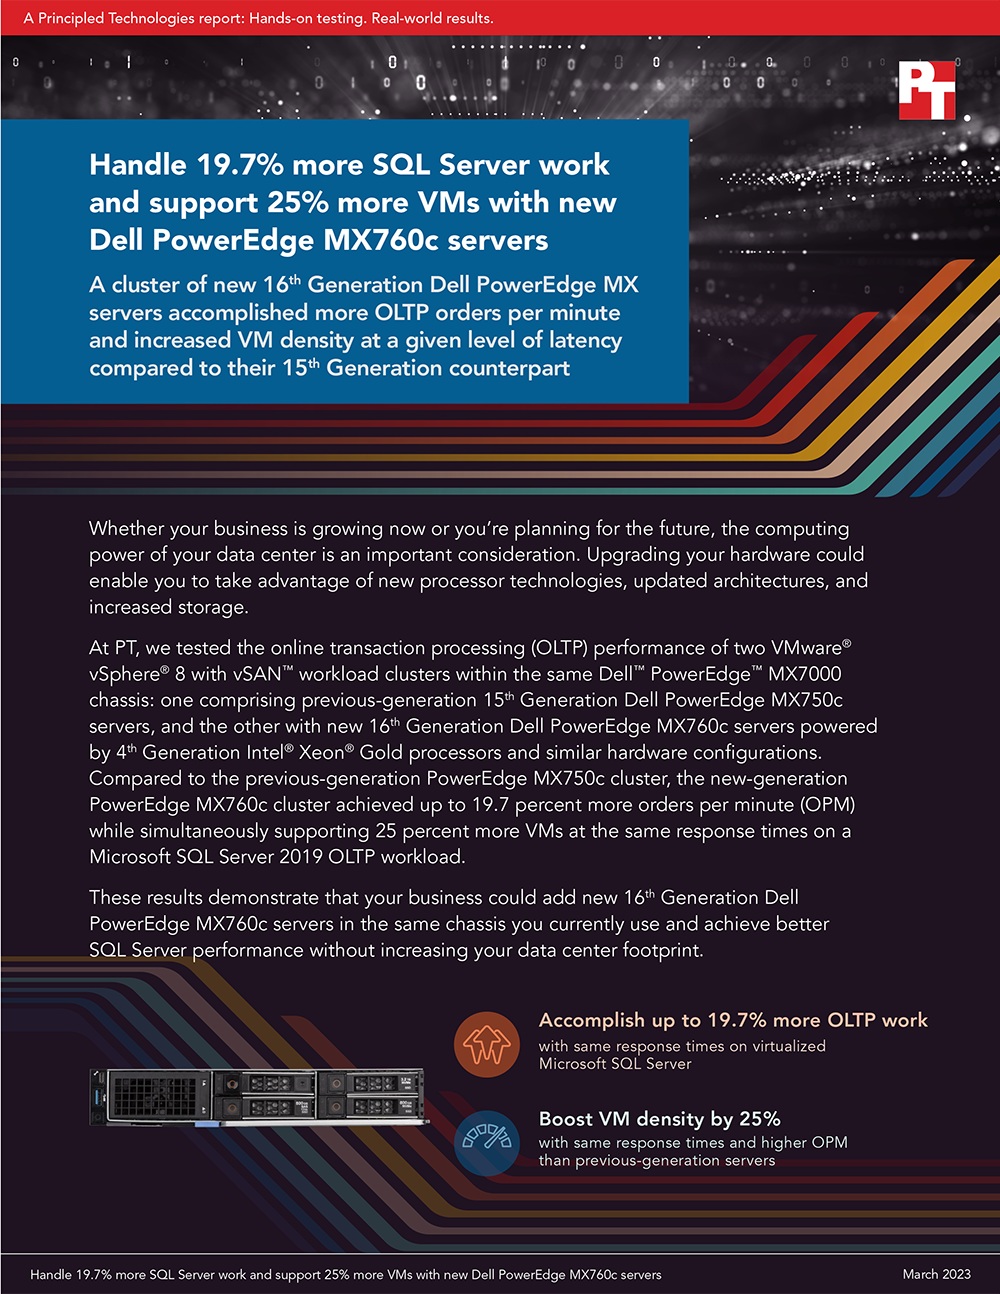  Handle 19.7% more SQL Server work and support 25% more VMs with new Dell PowerEdge MX760c servers